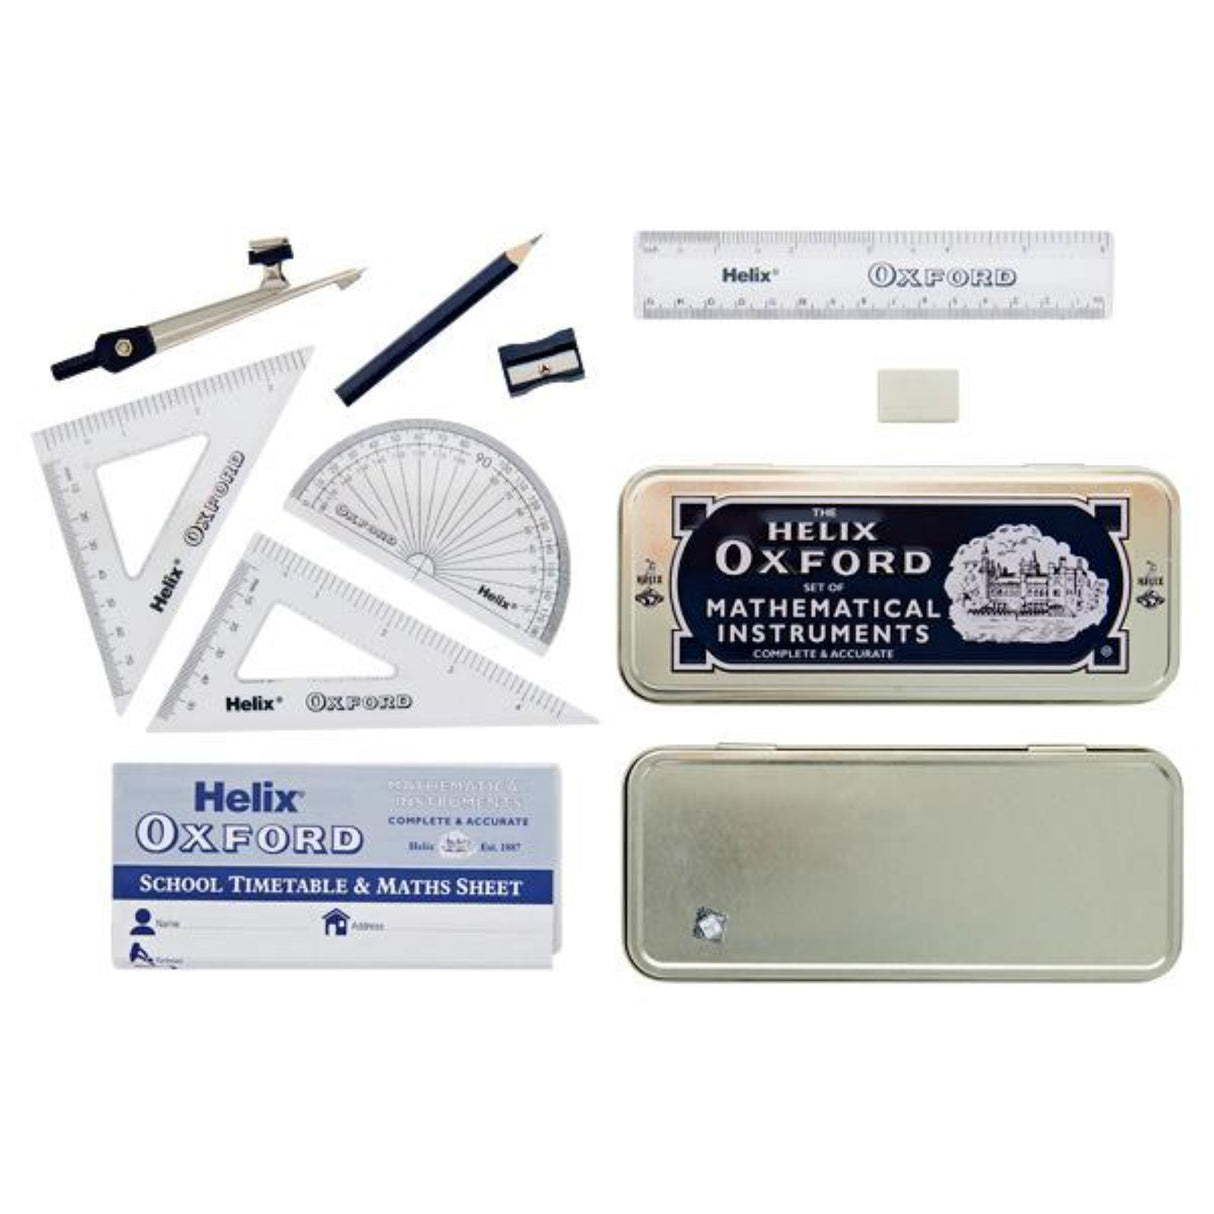 Helix Oxford Set of Mathematical Instruments - Complete & Accurate | Stationery Shop UK